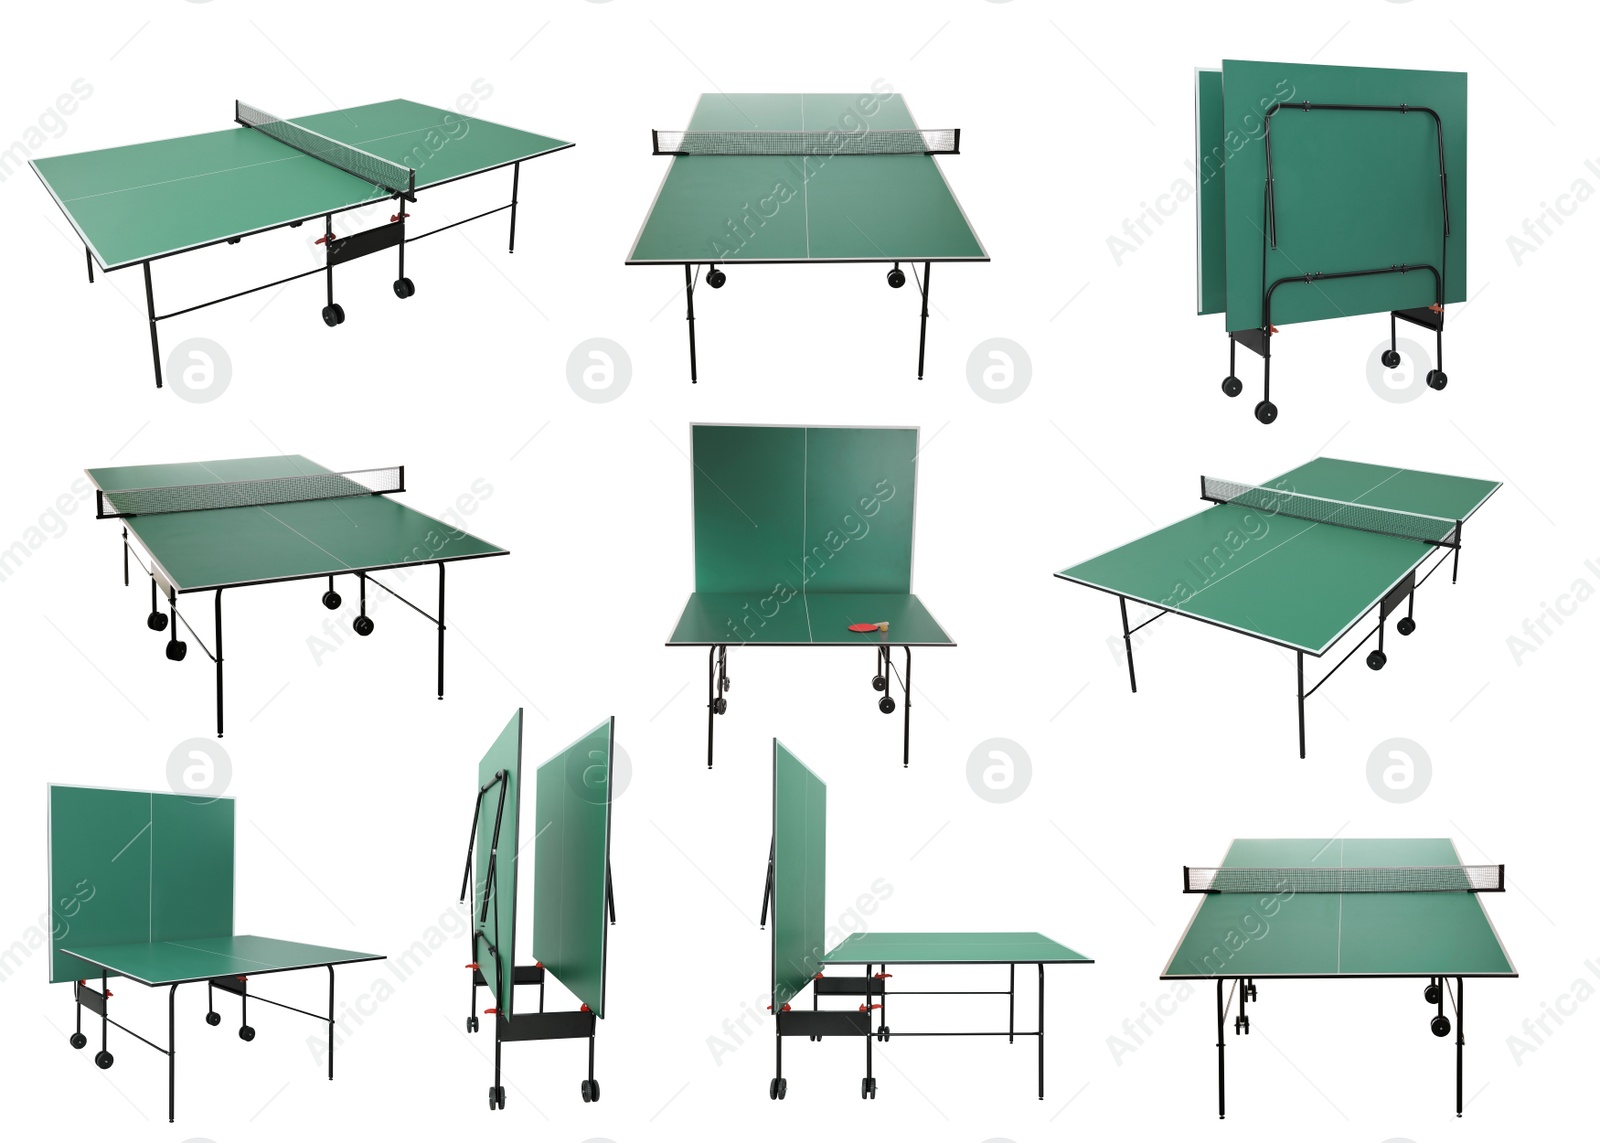 Image of Green ping pong tables on white background, collage